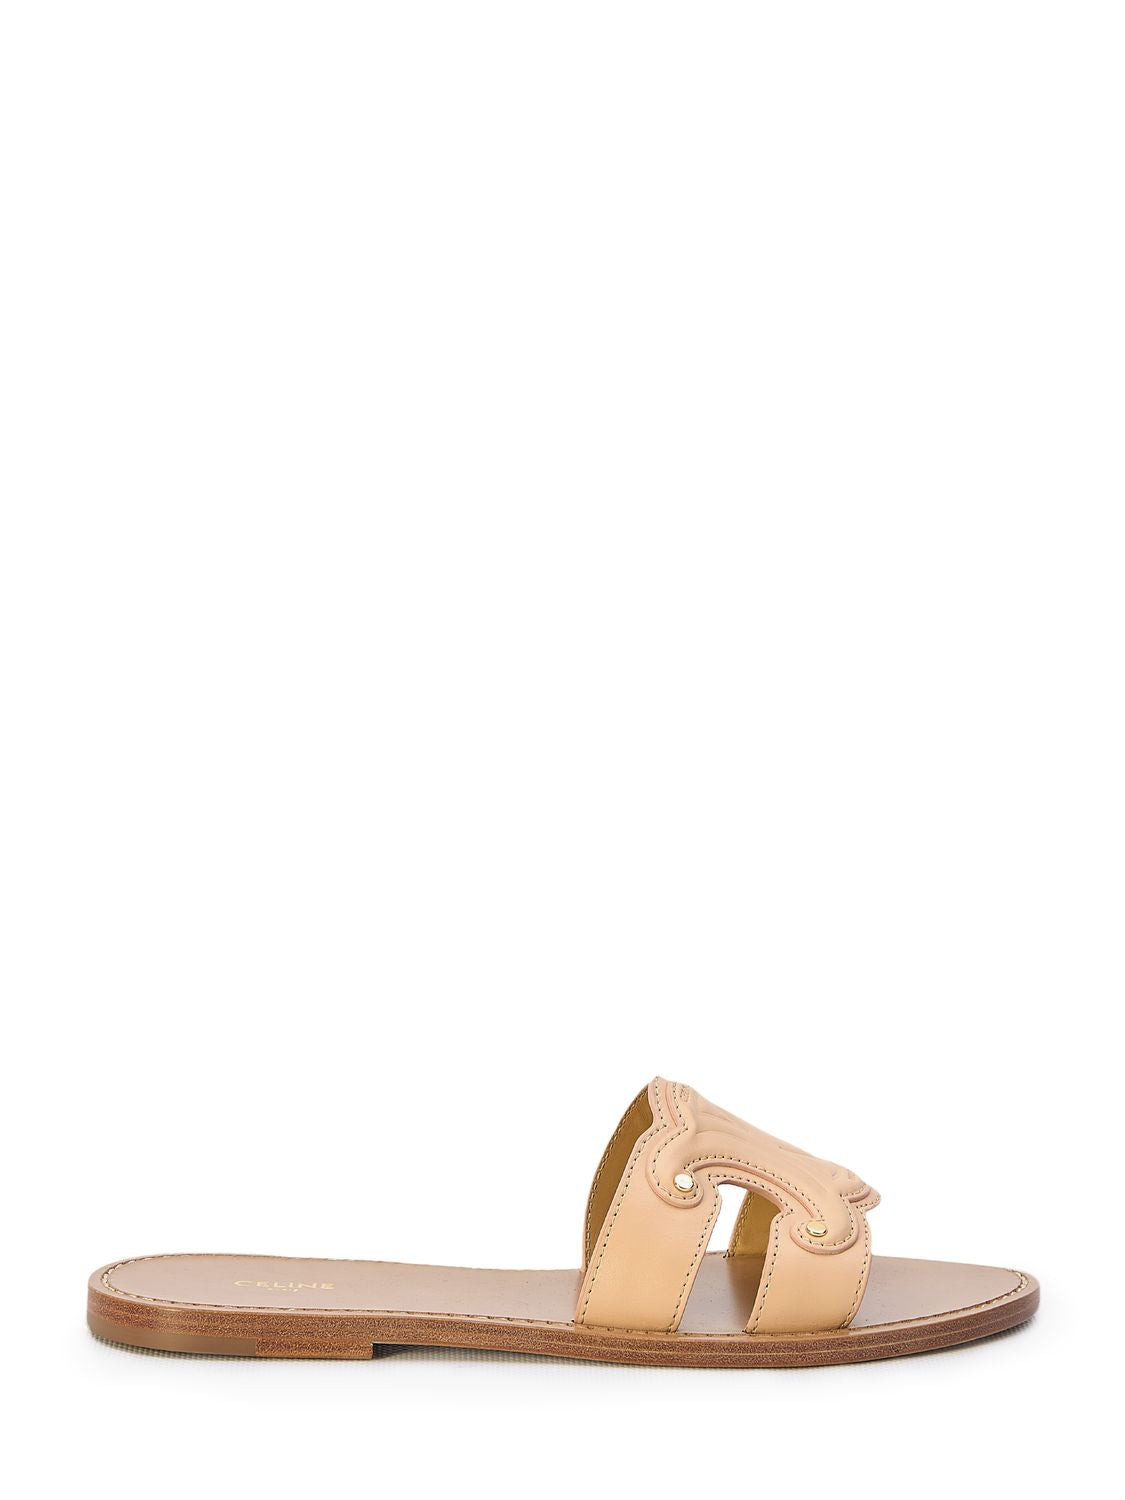 Celine Embossed Nude Triomphe Sandals With Gold-tone Studs In Beige